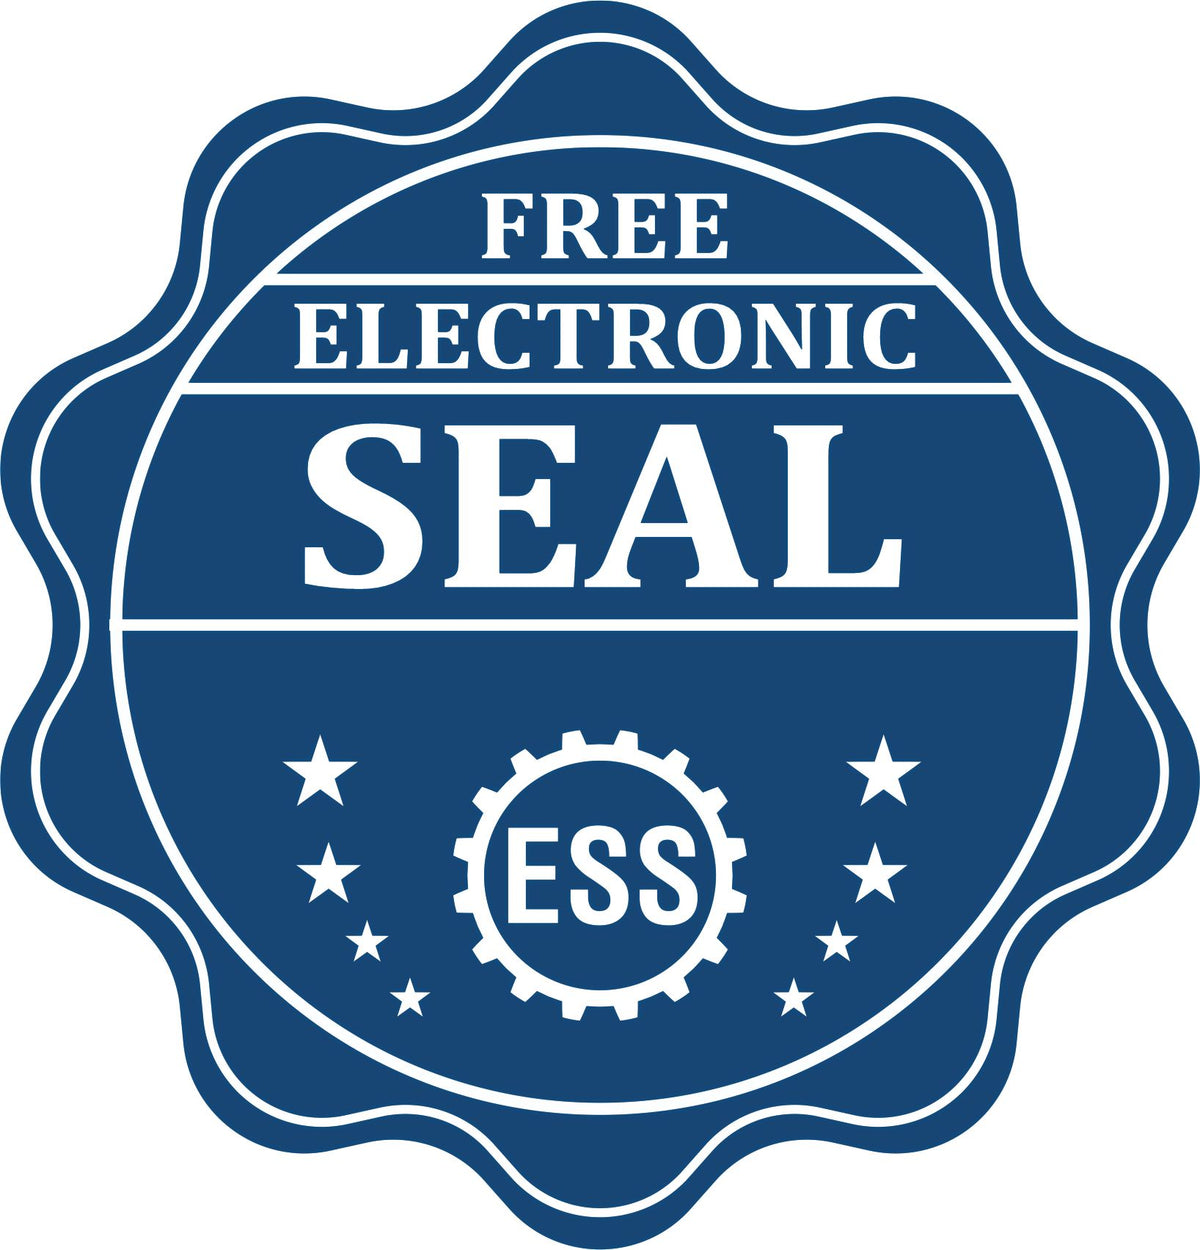 A badge showing a free electronic seal for the Soft Pocket Indiana Landscape Architect Embosser with stars and the ESS gear on the emblem.